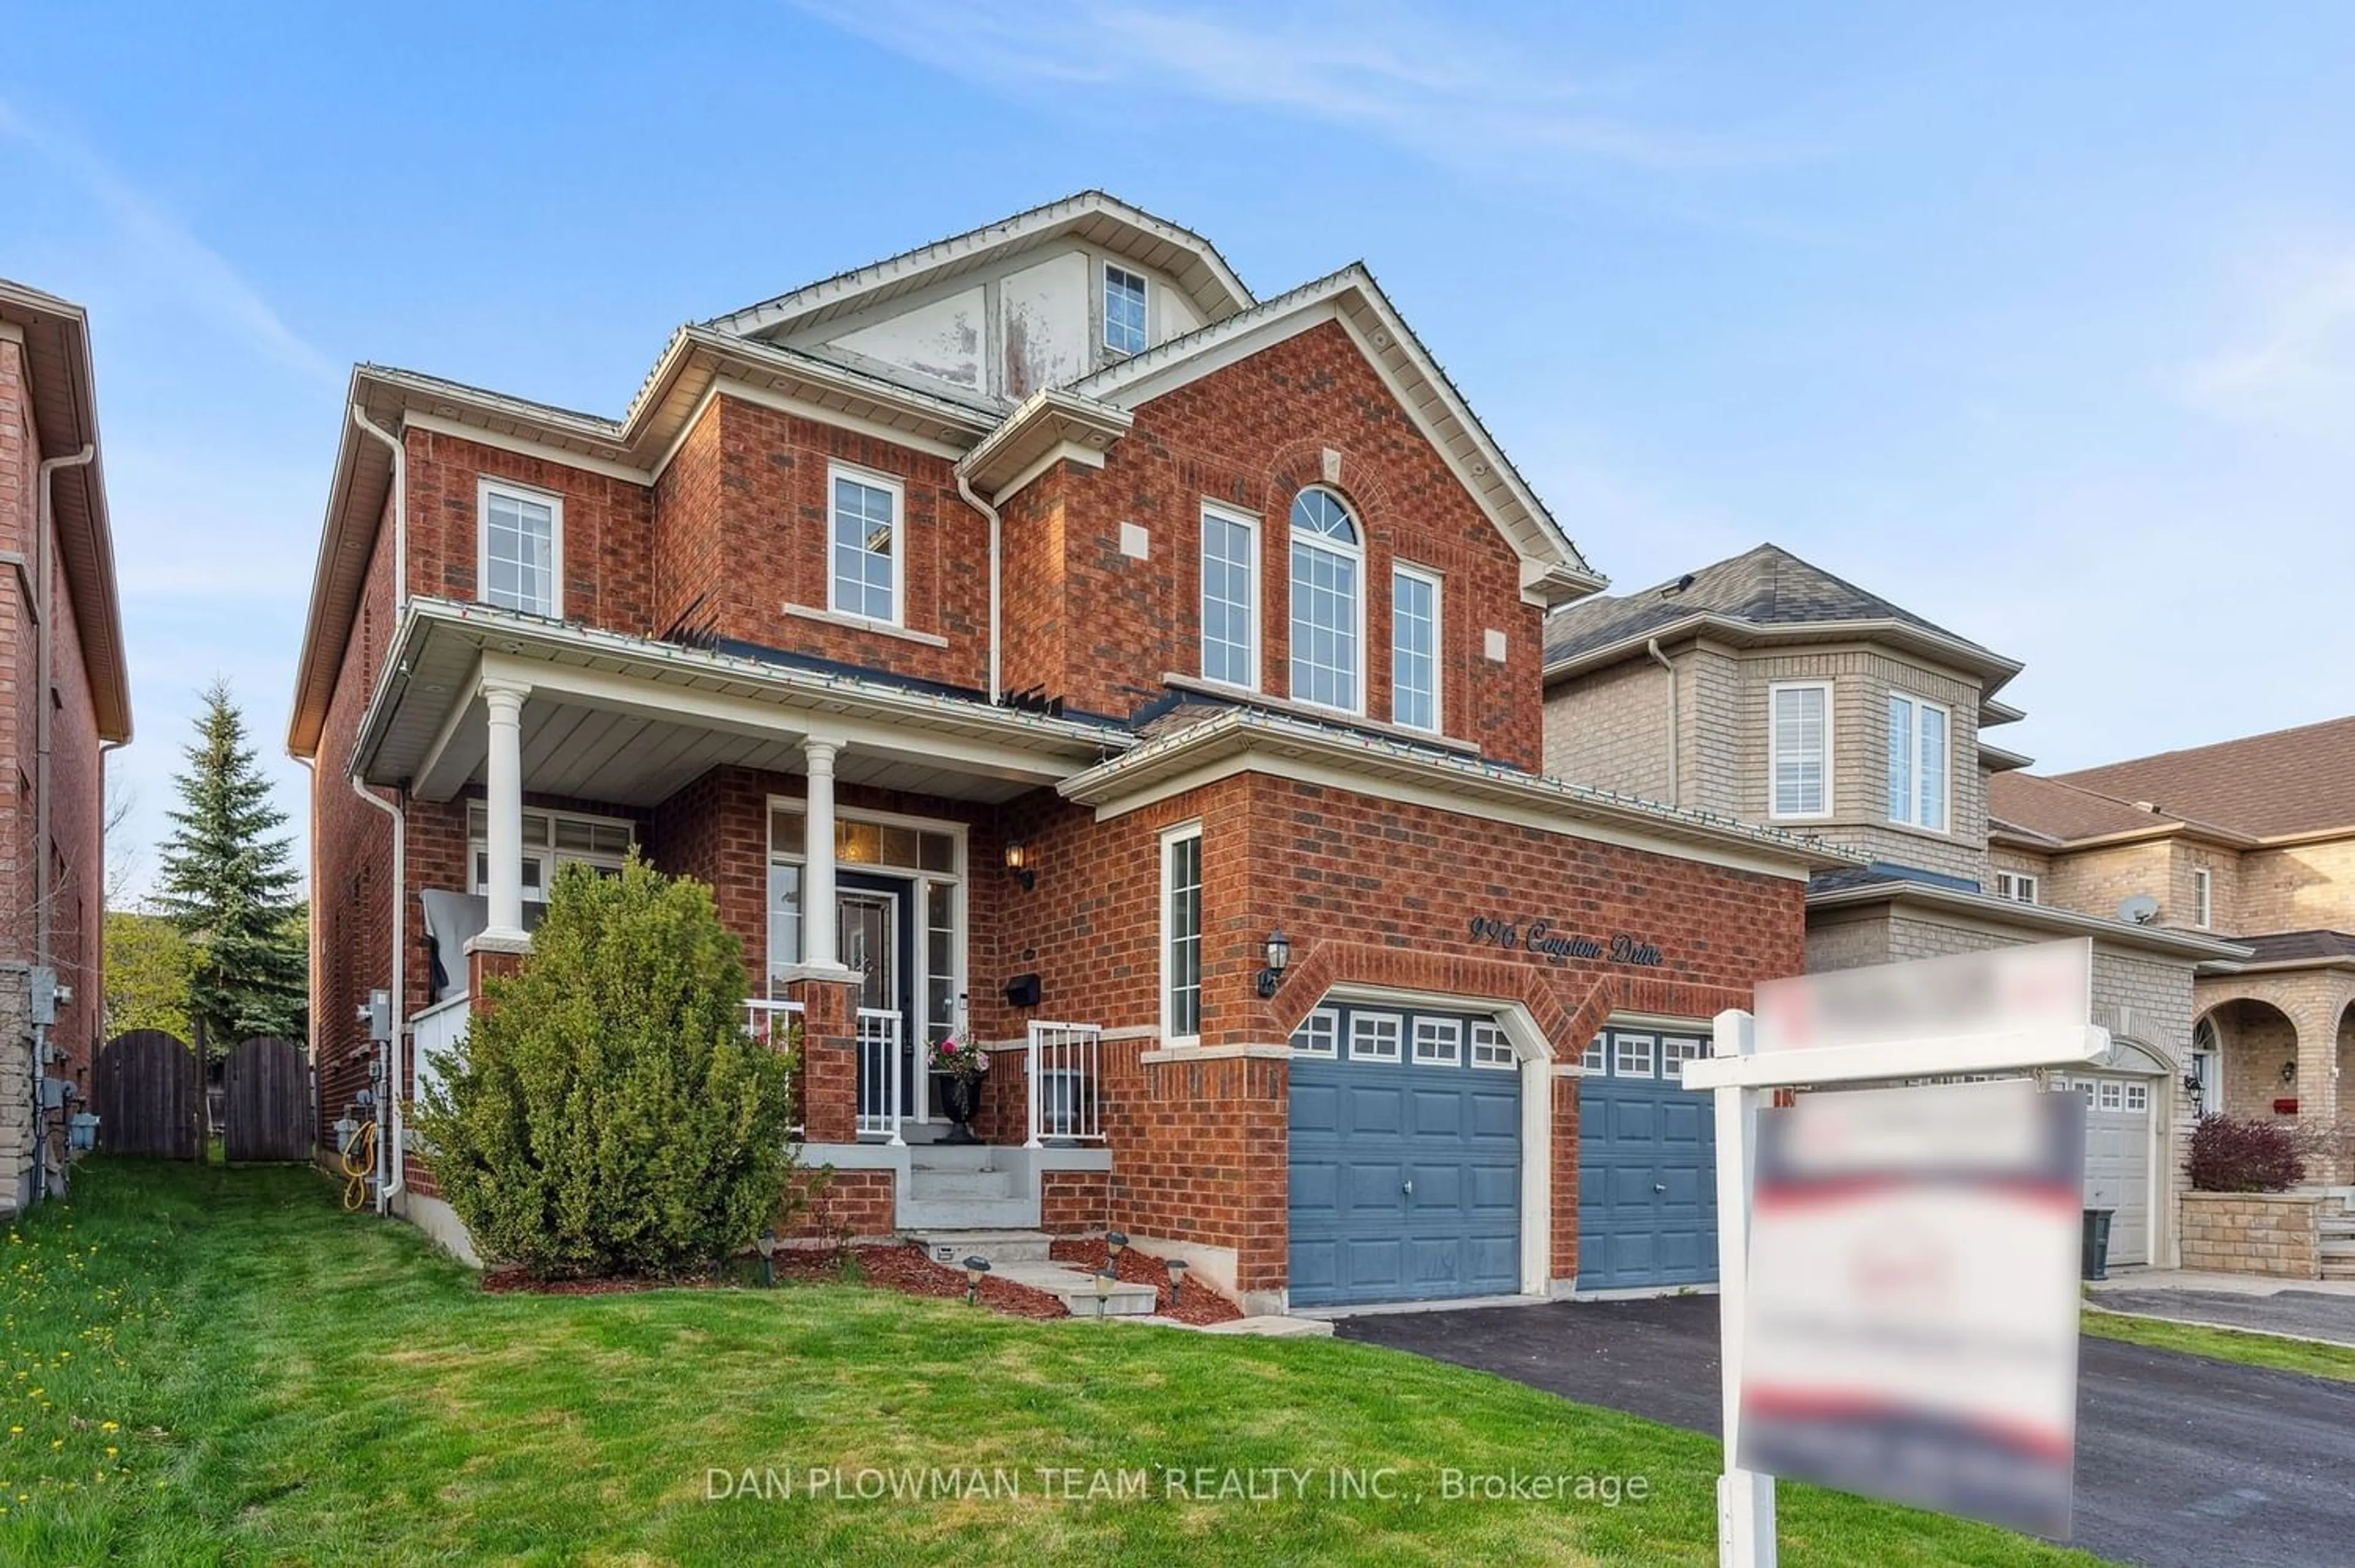 Home with brick exterior material for 996 Coyston Dr, Oshawa Ontario L1K 3C4